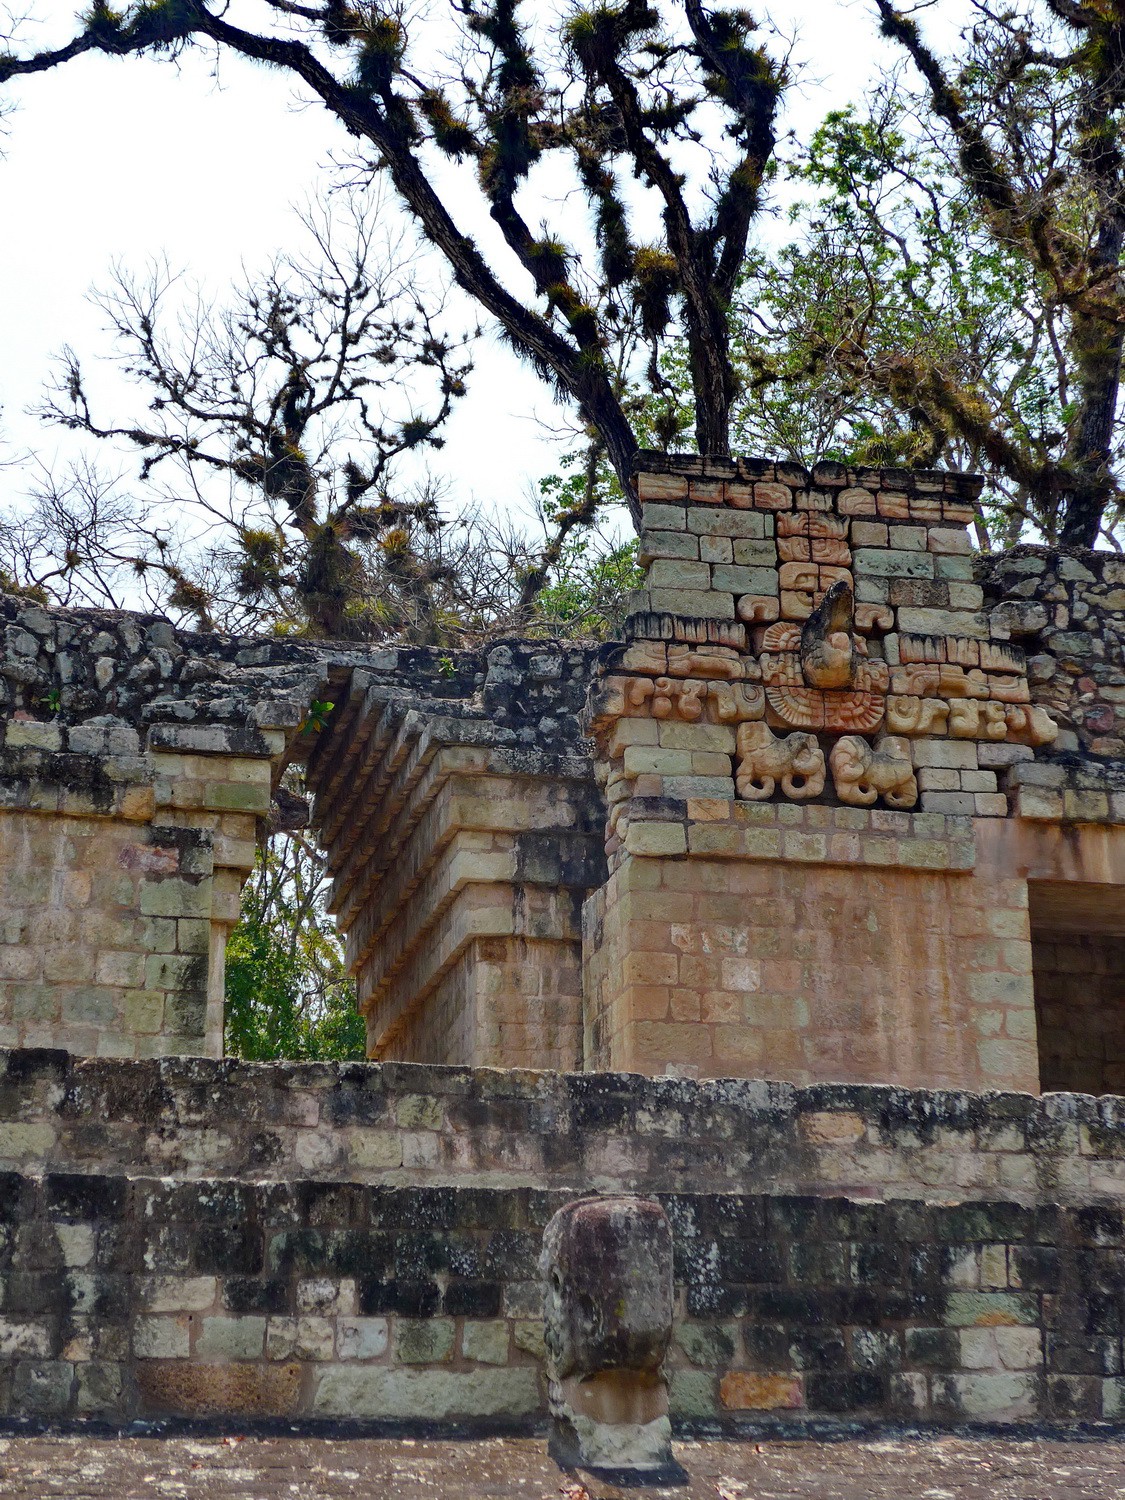 Side wall of the Pelote place with a head of a Macaw